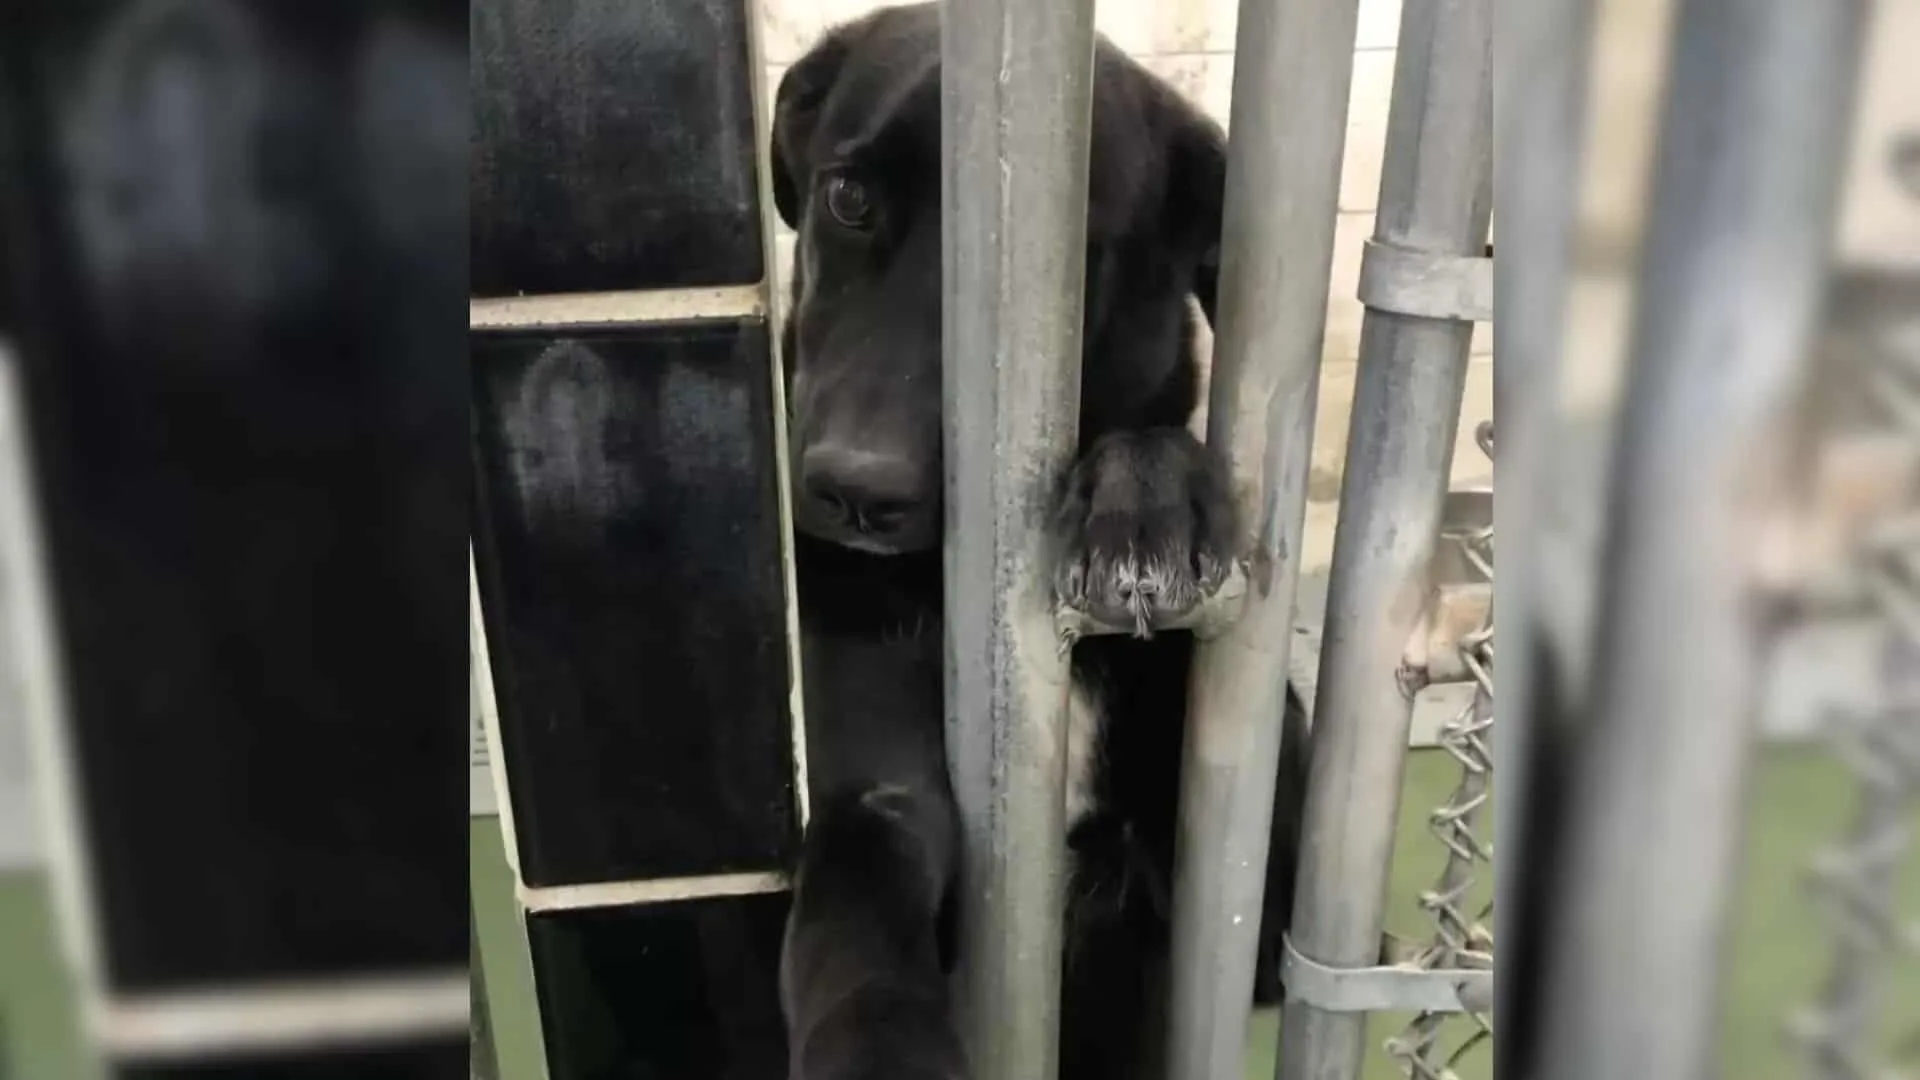 Shelter Dog Loves To Hold Hands With People Passing By His Kennel Bars